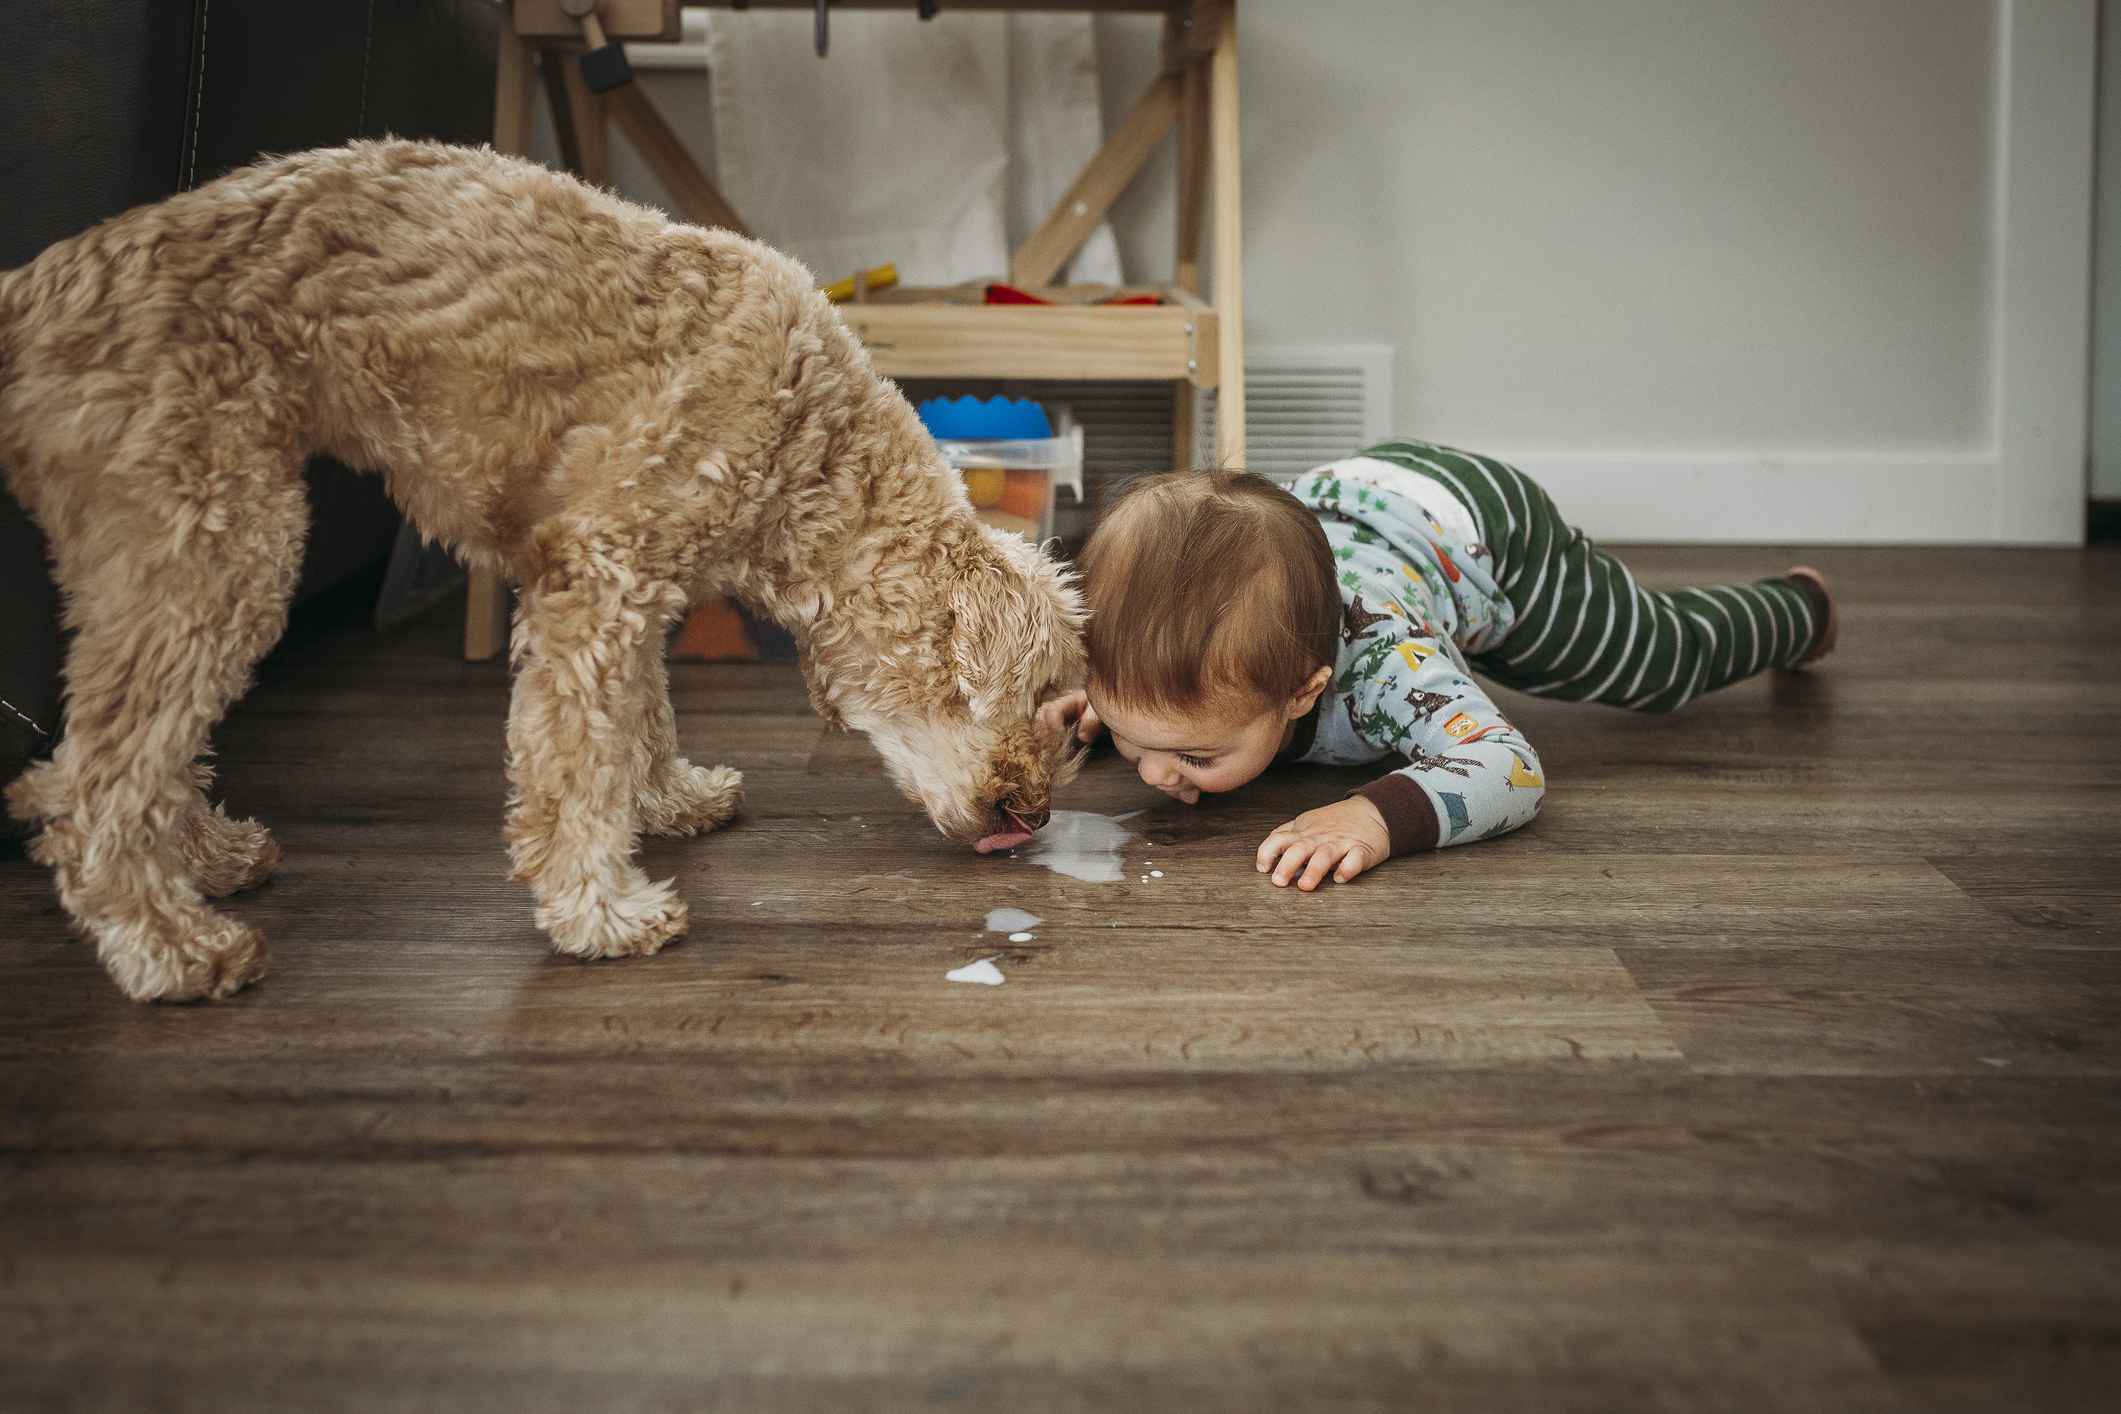 A dog and a child are attempting to lick spilled milk off the floor